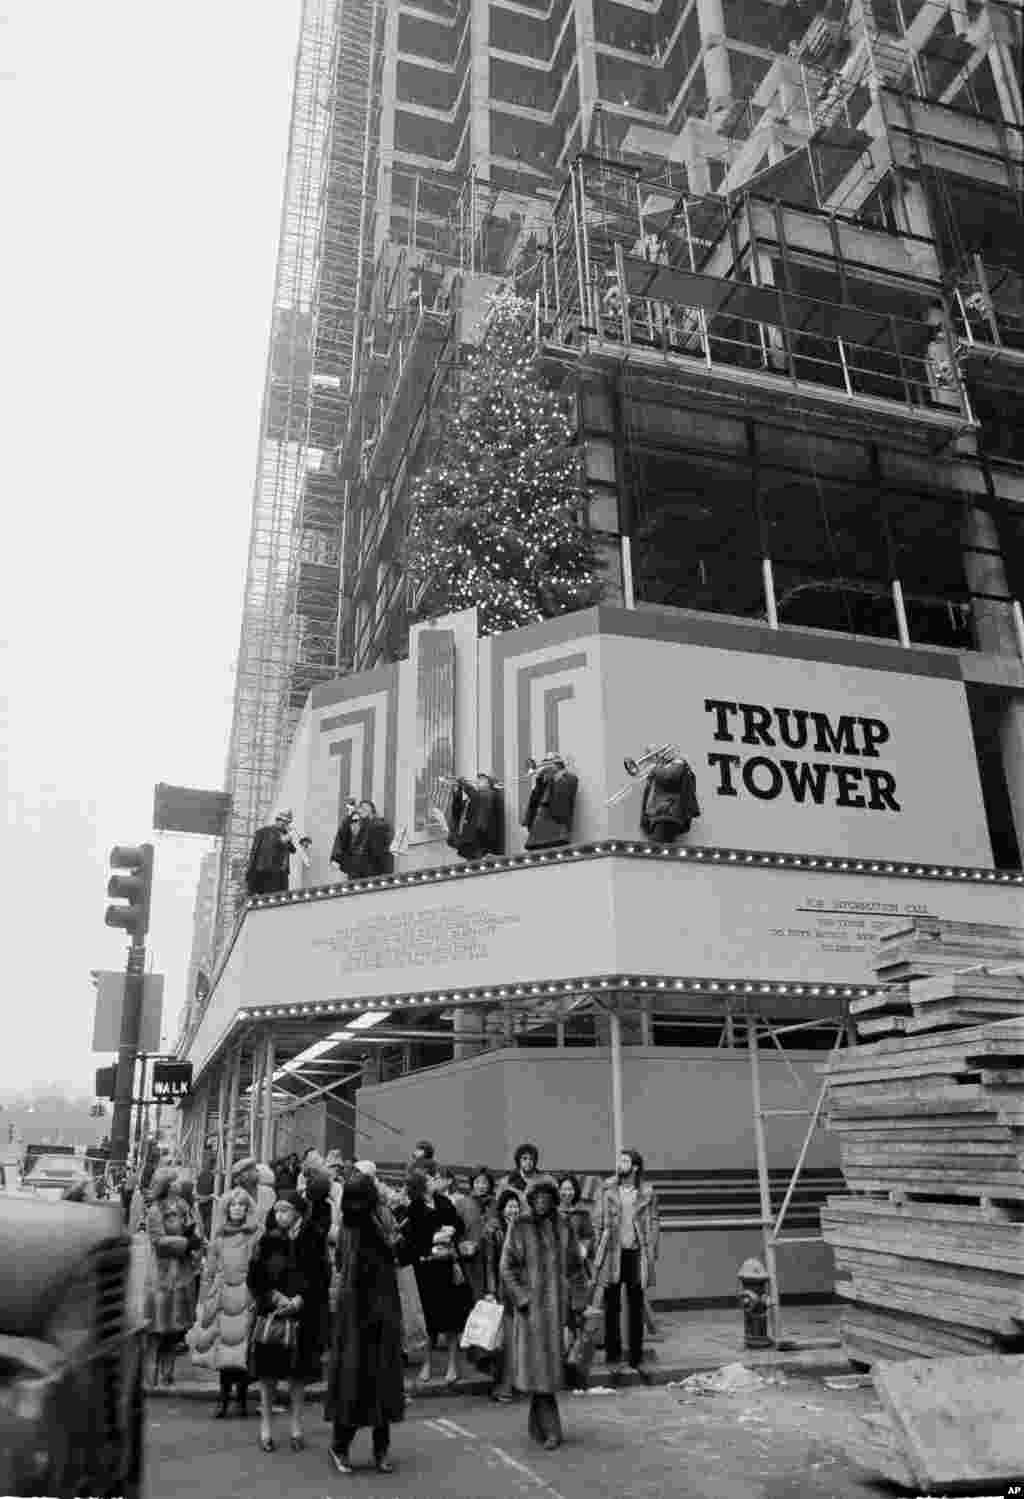 A brass quintet plays atop a ledge above New York's Fifth Avenue on the partially completed Trump Tower, serenading passers-by with Christmas carols as the rush to find last-minute gifts reach a frenzied pace, Dec. 23, 1981. (AP Photo/Suzanne Vlamis)